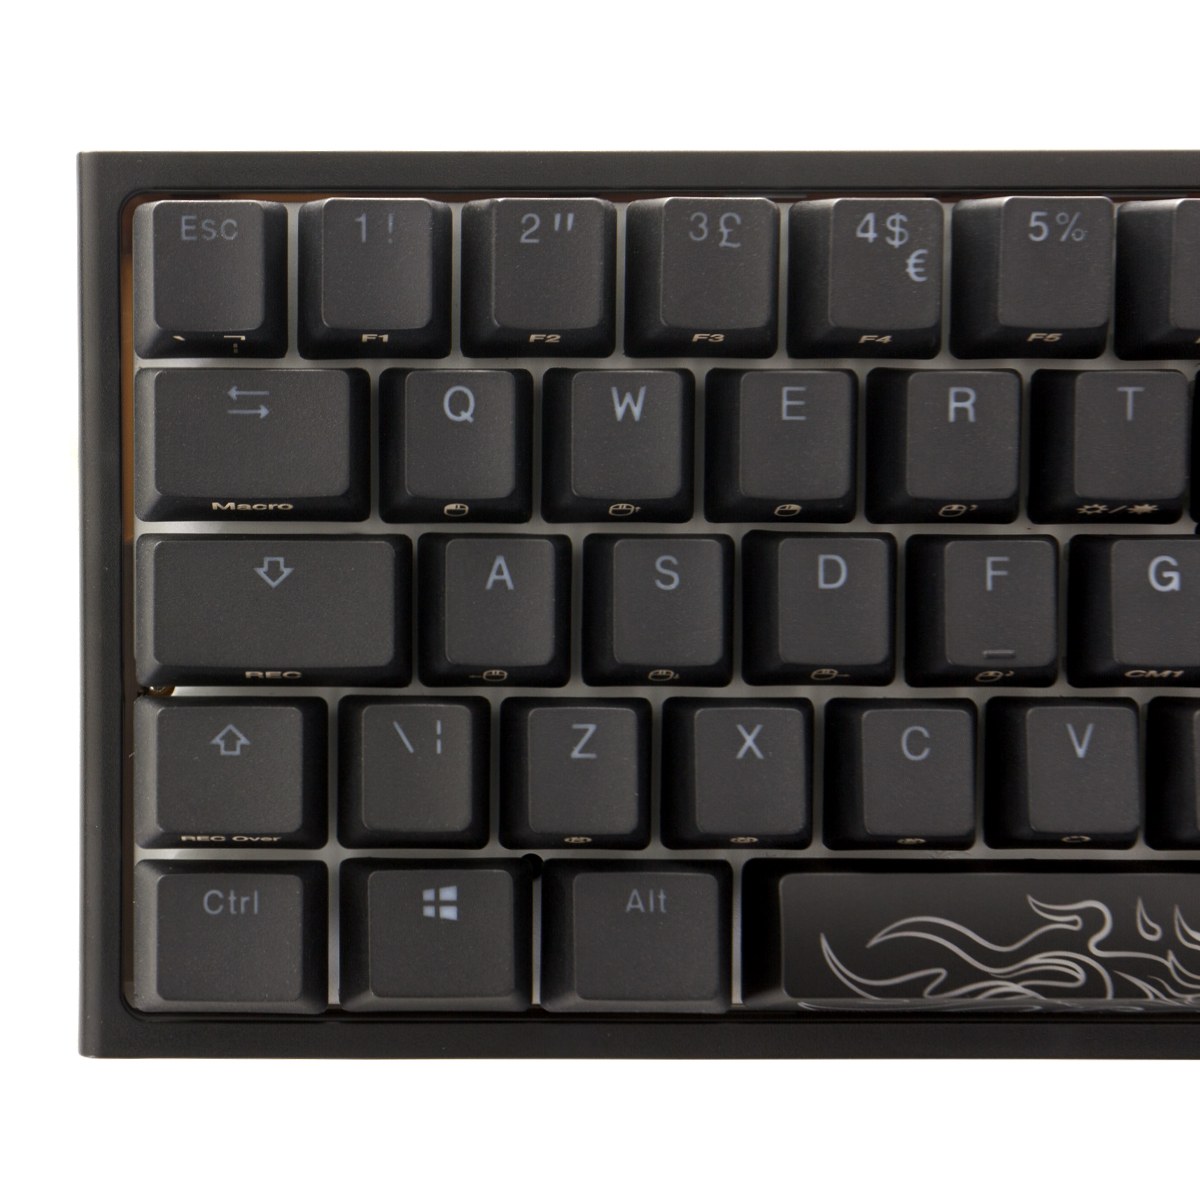 Ducky - Ducky One 2 Pro Mini 60% Mechanical Gaming Keyboard Black MX Cherry Silent Red Switch - UK Layout